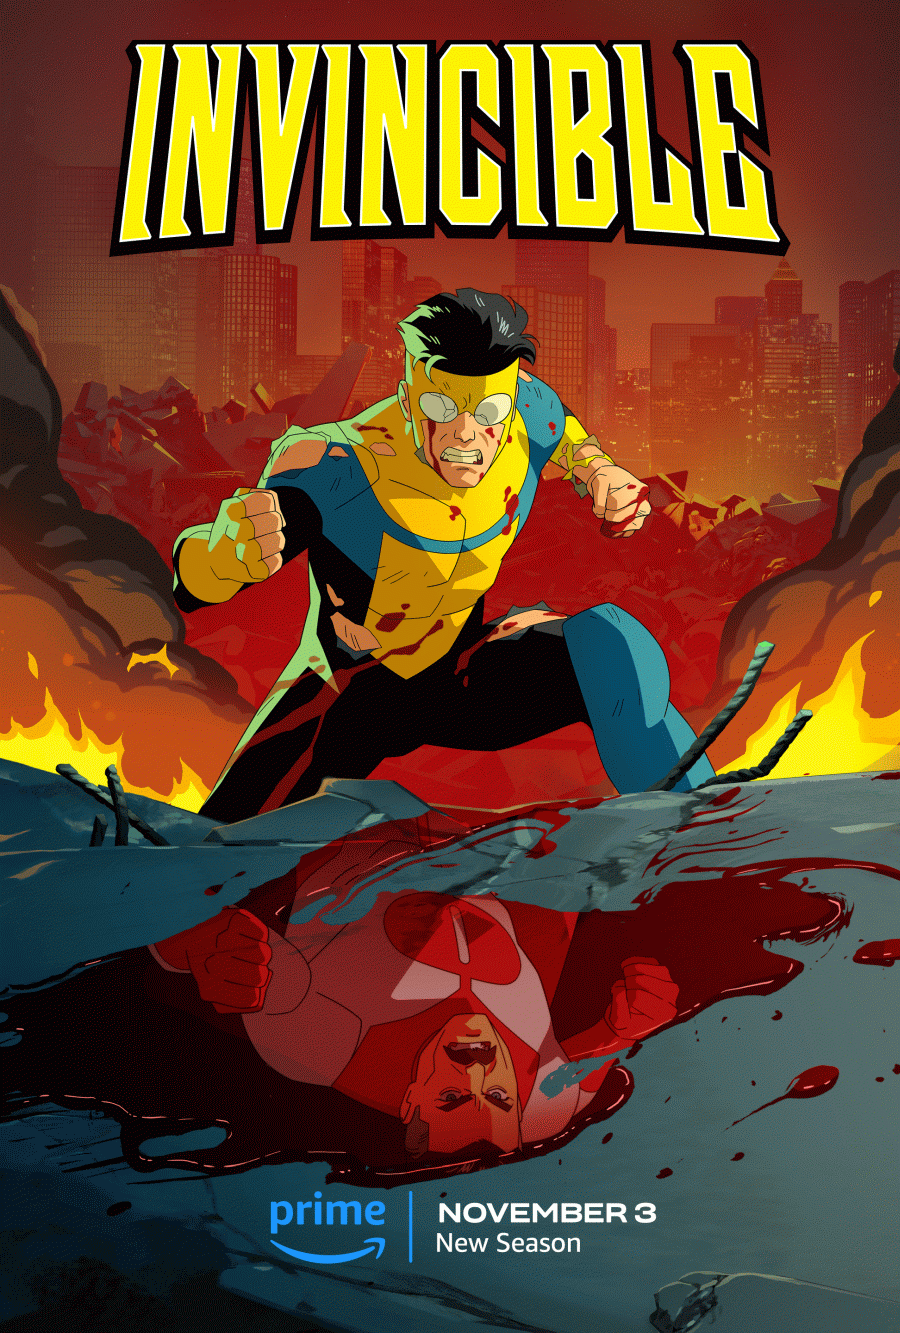 How many episodes are in Invincible Season 2 on Prime Video?